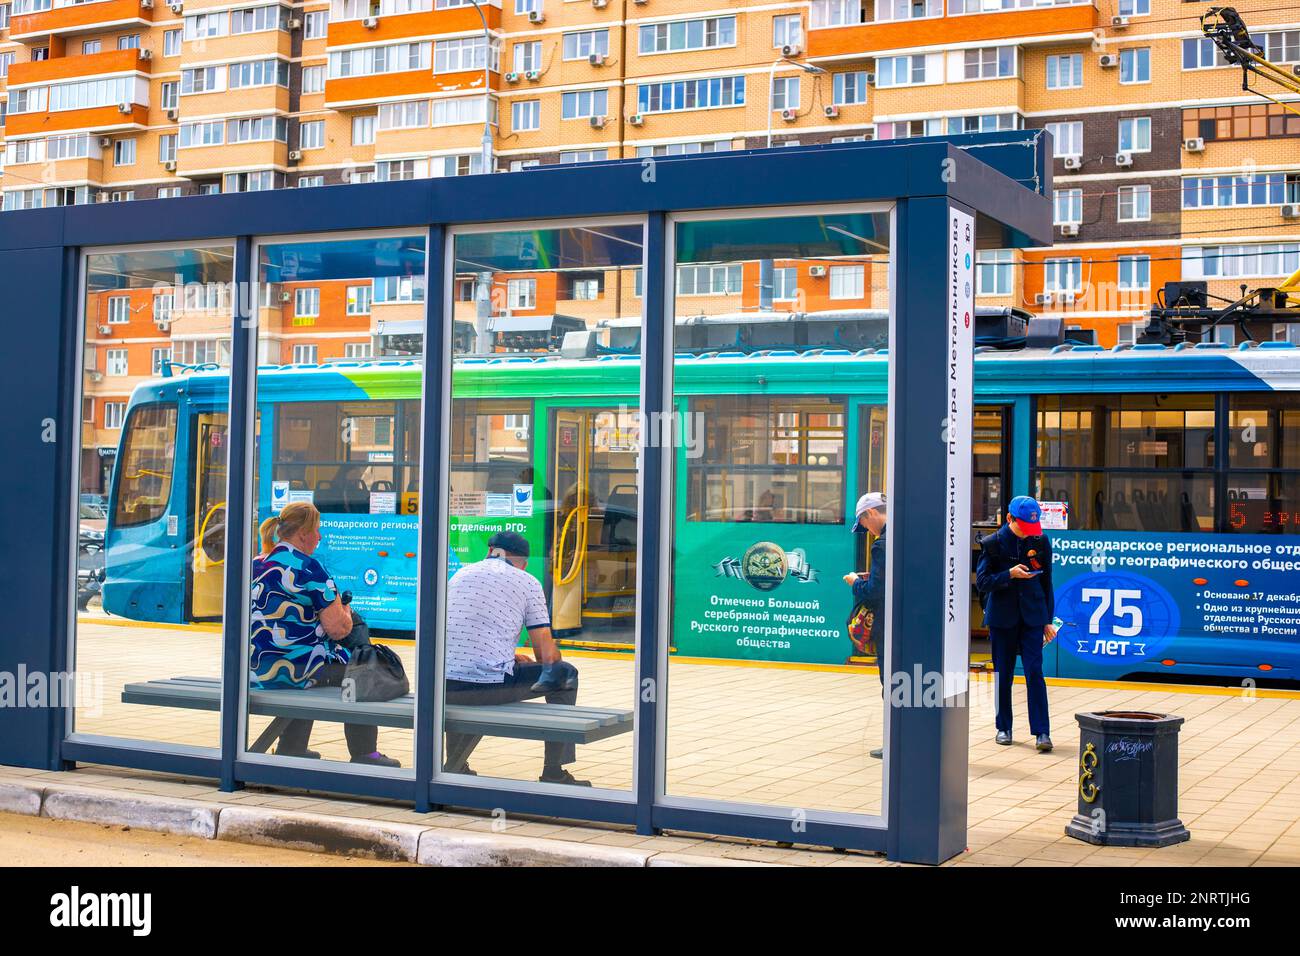 People waiting for a streetcar at a transparent streetcar stop in Krasnodar, Russia-28.04.2022 Stock Photo